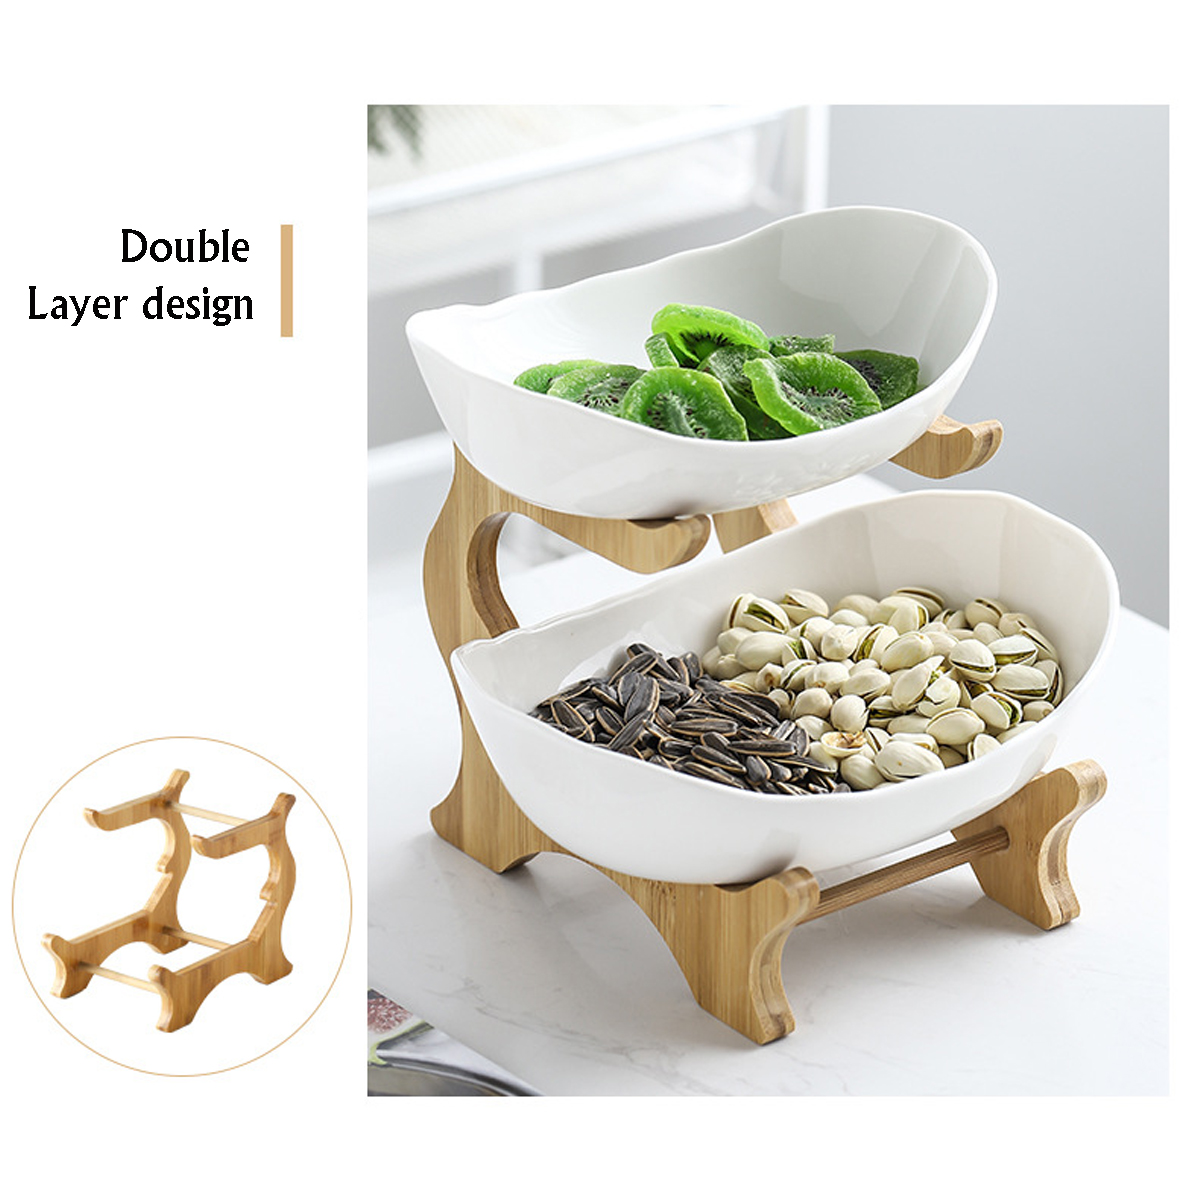 Double Layer White Ceramic Candy Dish Living Room Home Fruit Plate Creative Modern Dried Fruit Basket Desktop Storage